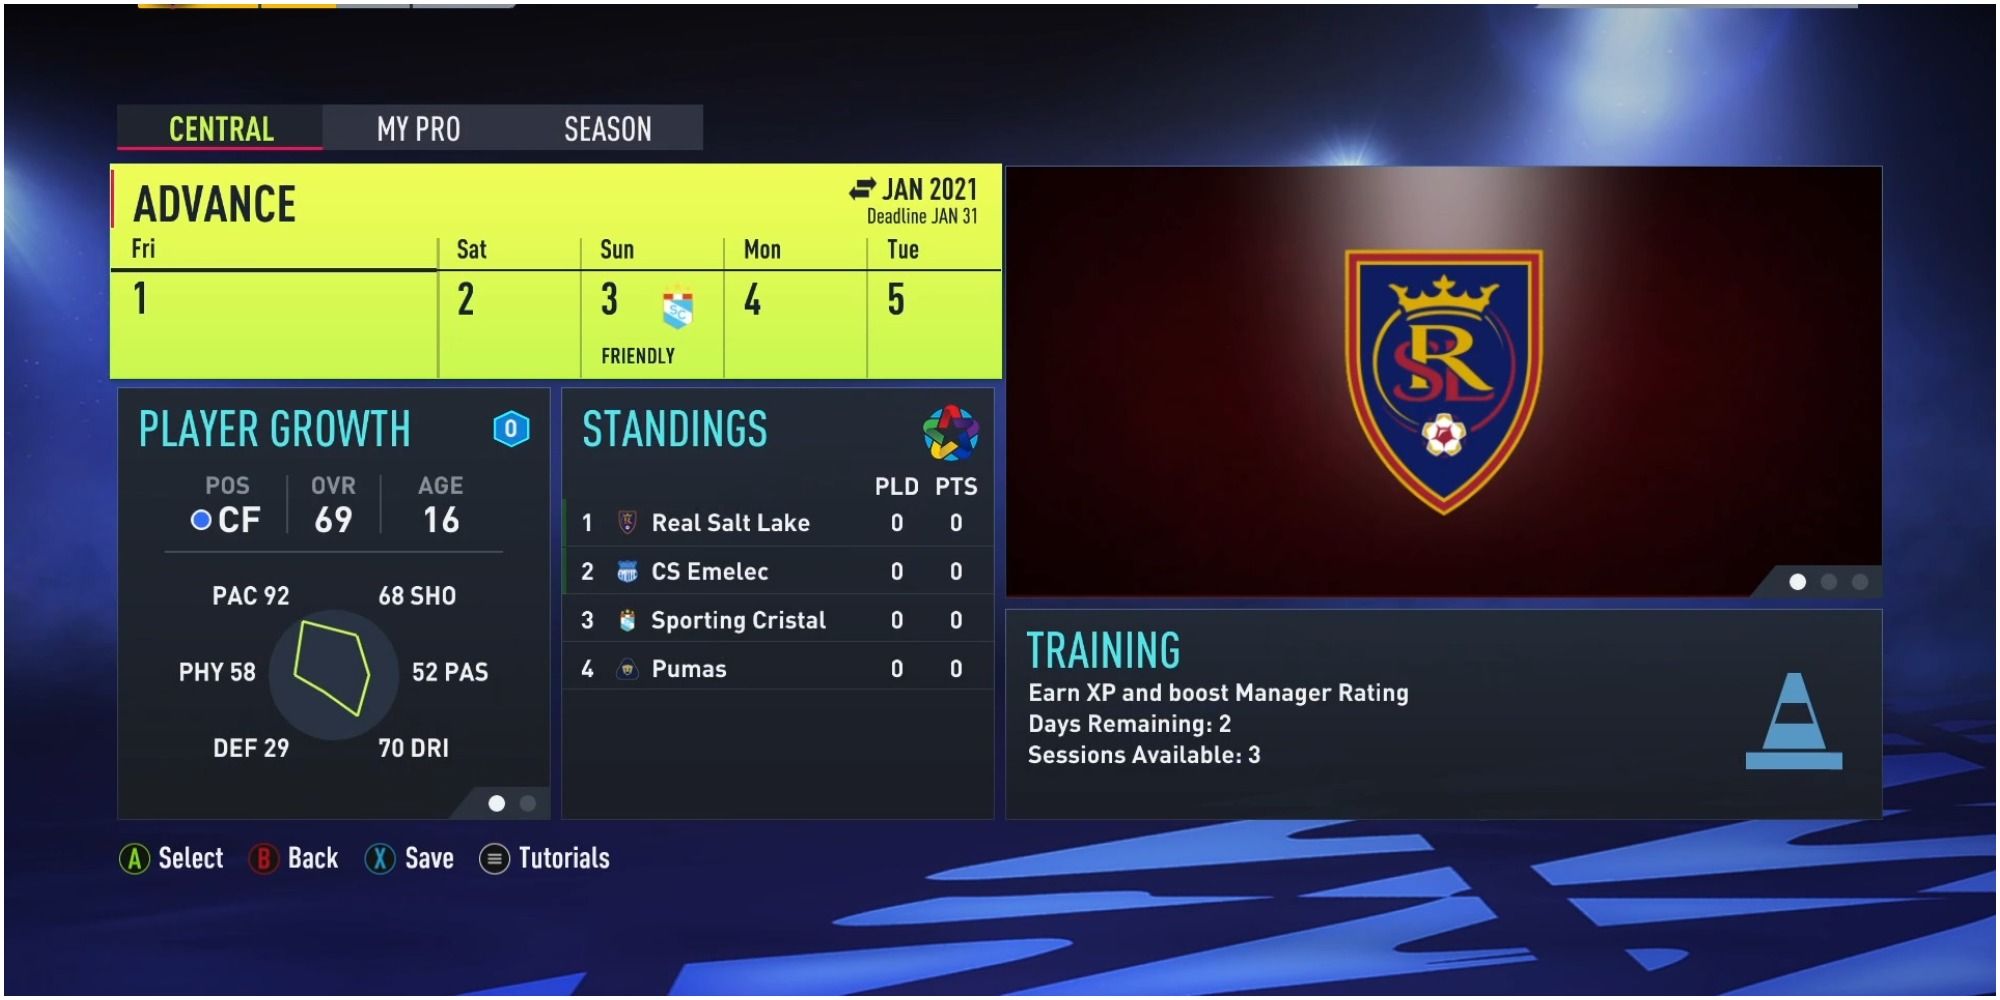 FIFA 22 Looking At Player Attributes While On A Team